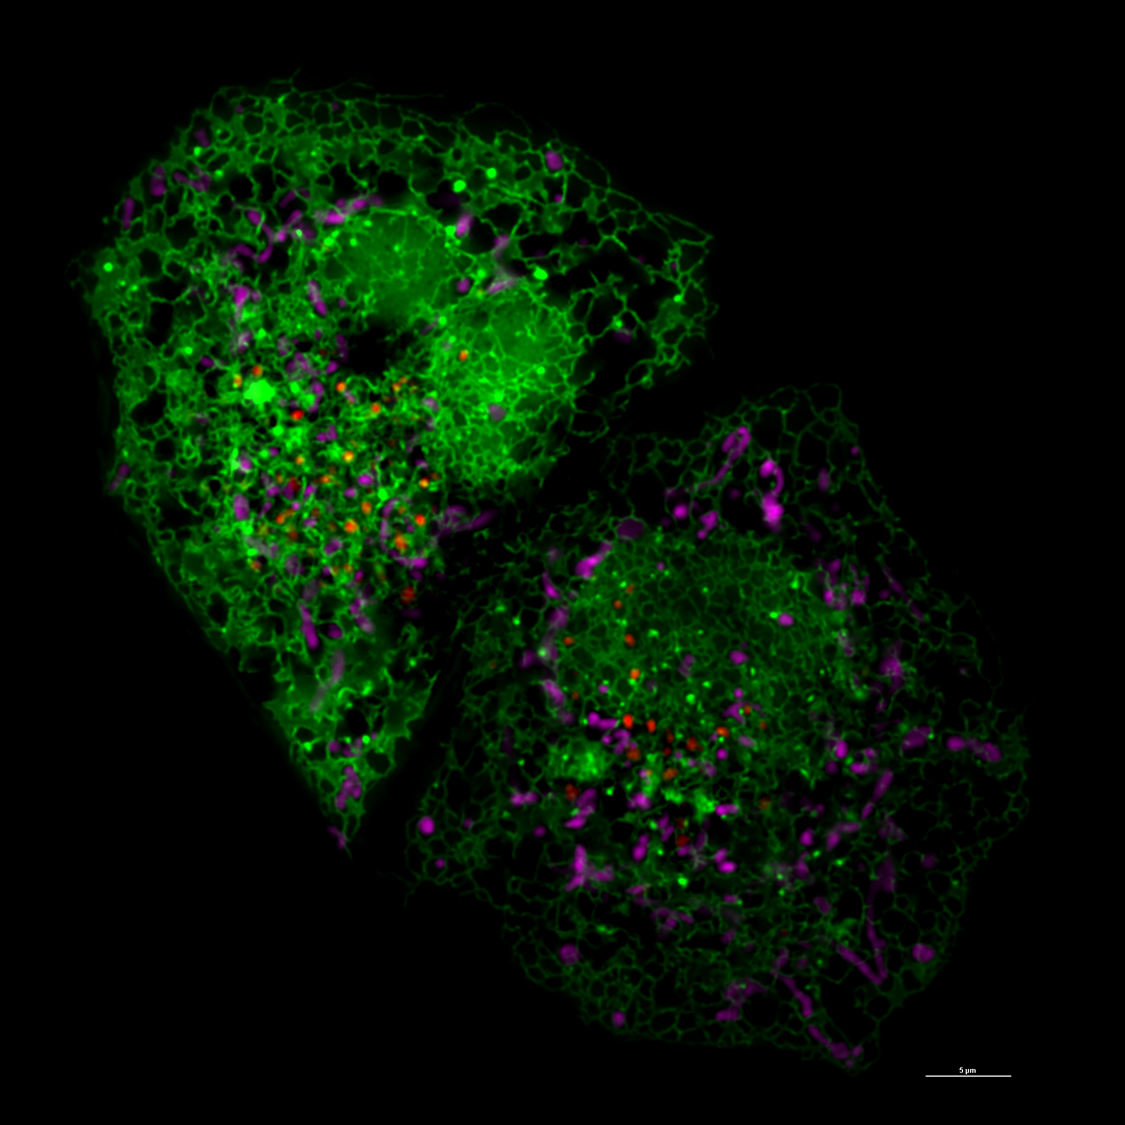 A super resolution image of a human cell